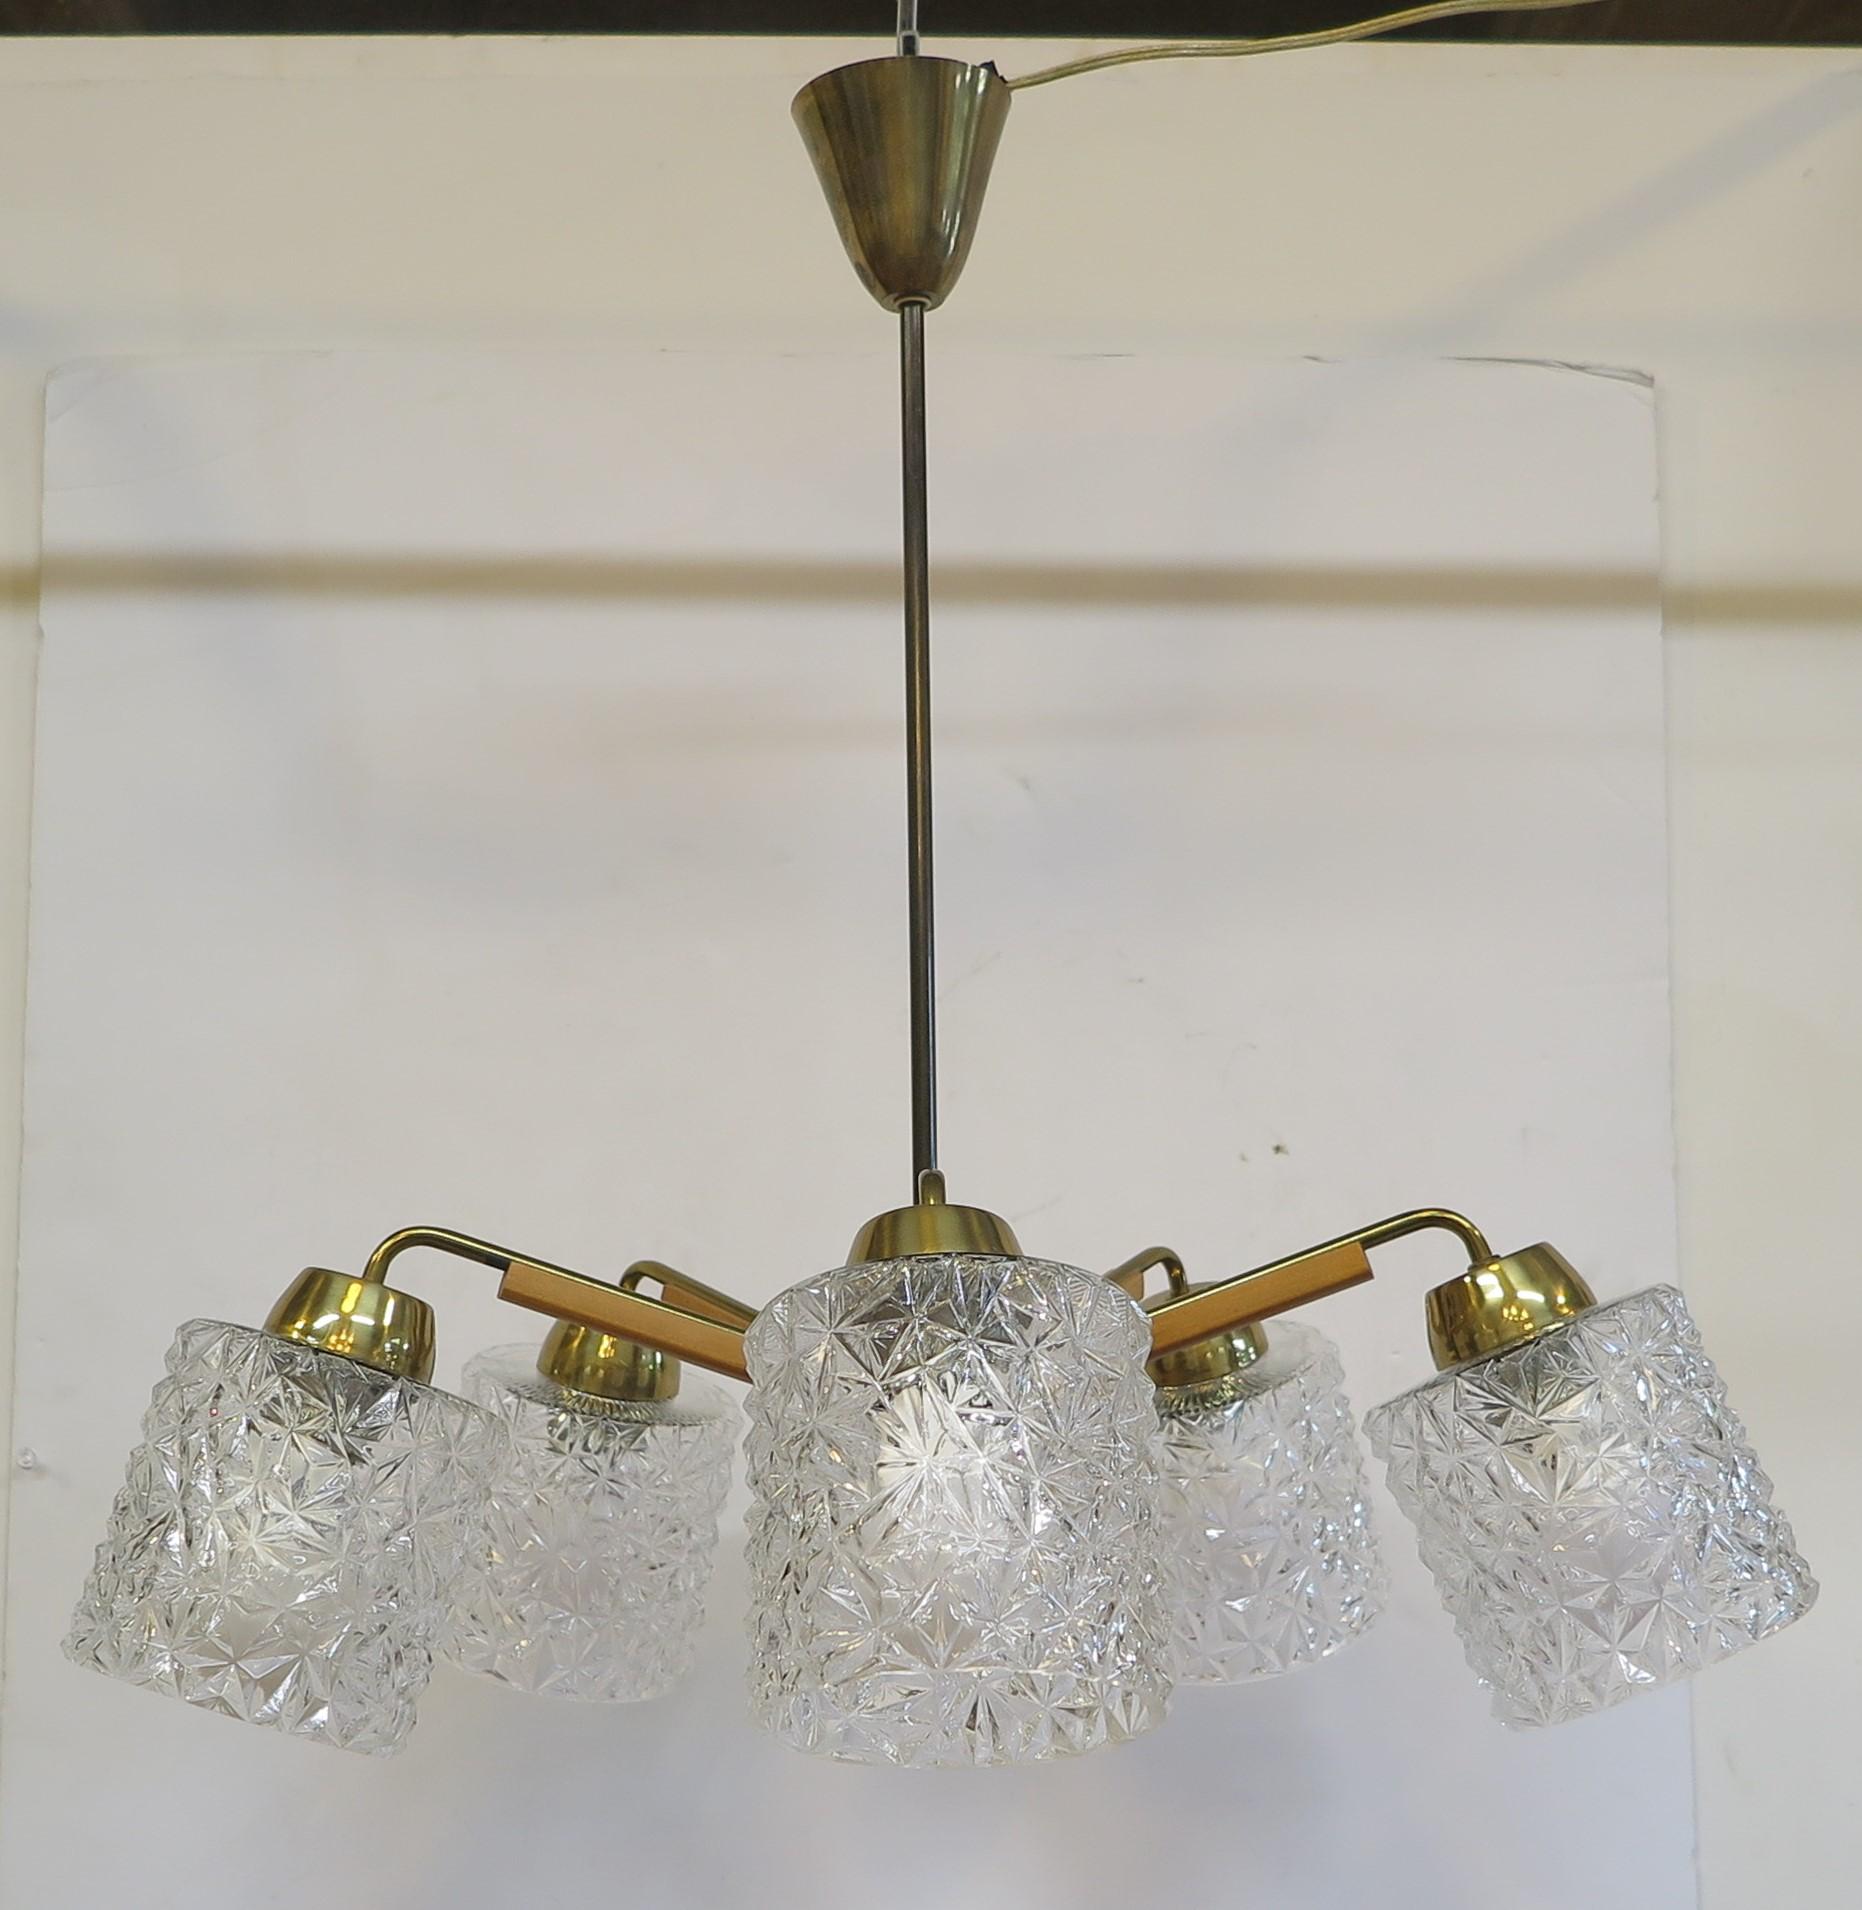 Austrian Chandelier by Kalmar. Brass arms with walnut wood detail supporting pressed molded glass shades. Five arms angled up with shades and light directed down. Snowflake styled patterns molded into the glass cascades, reflects and luminates the